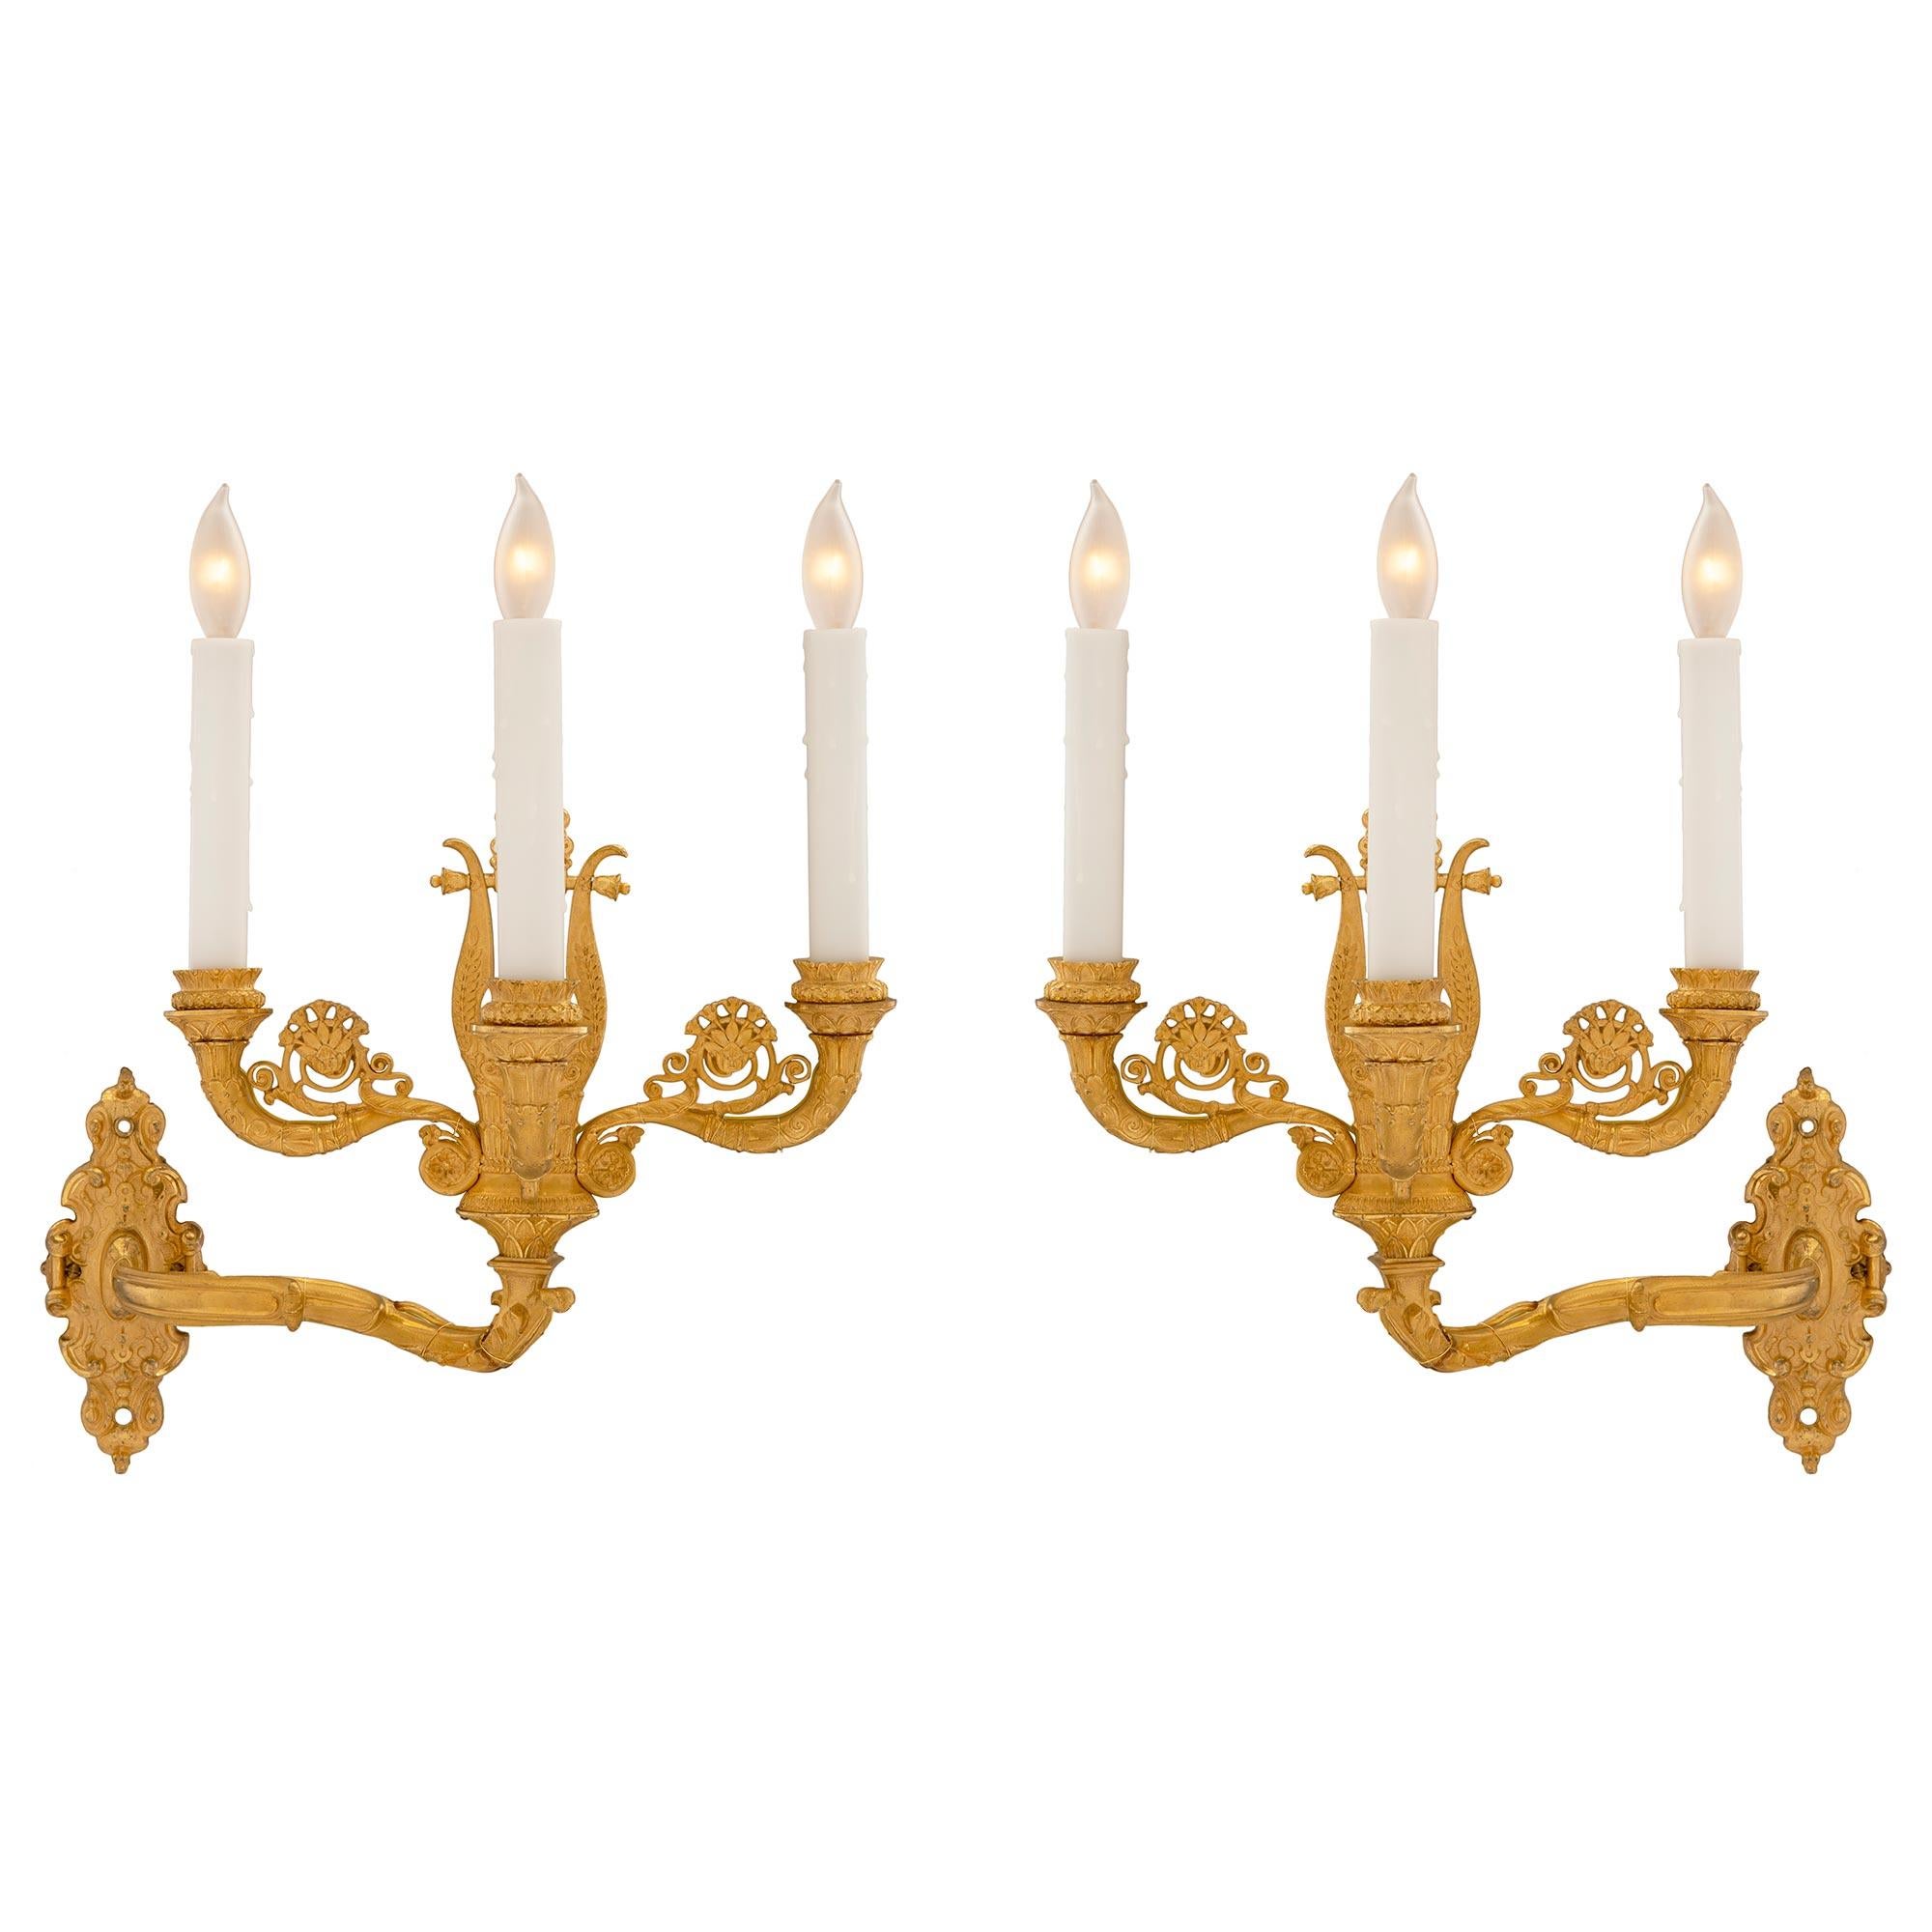 A stunning true pair of French early 19th century Charles X Period ormolu three arm Bras de Lumière sconces. Each high quality sconce displays a beautiful scrolled foliate back plate with an intricately hammered design all in a striking satin and